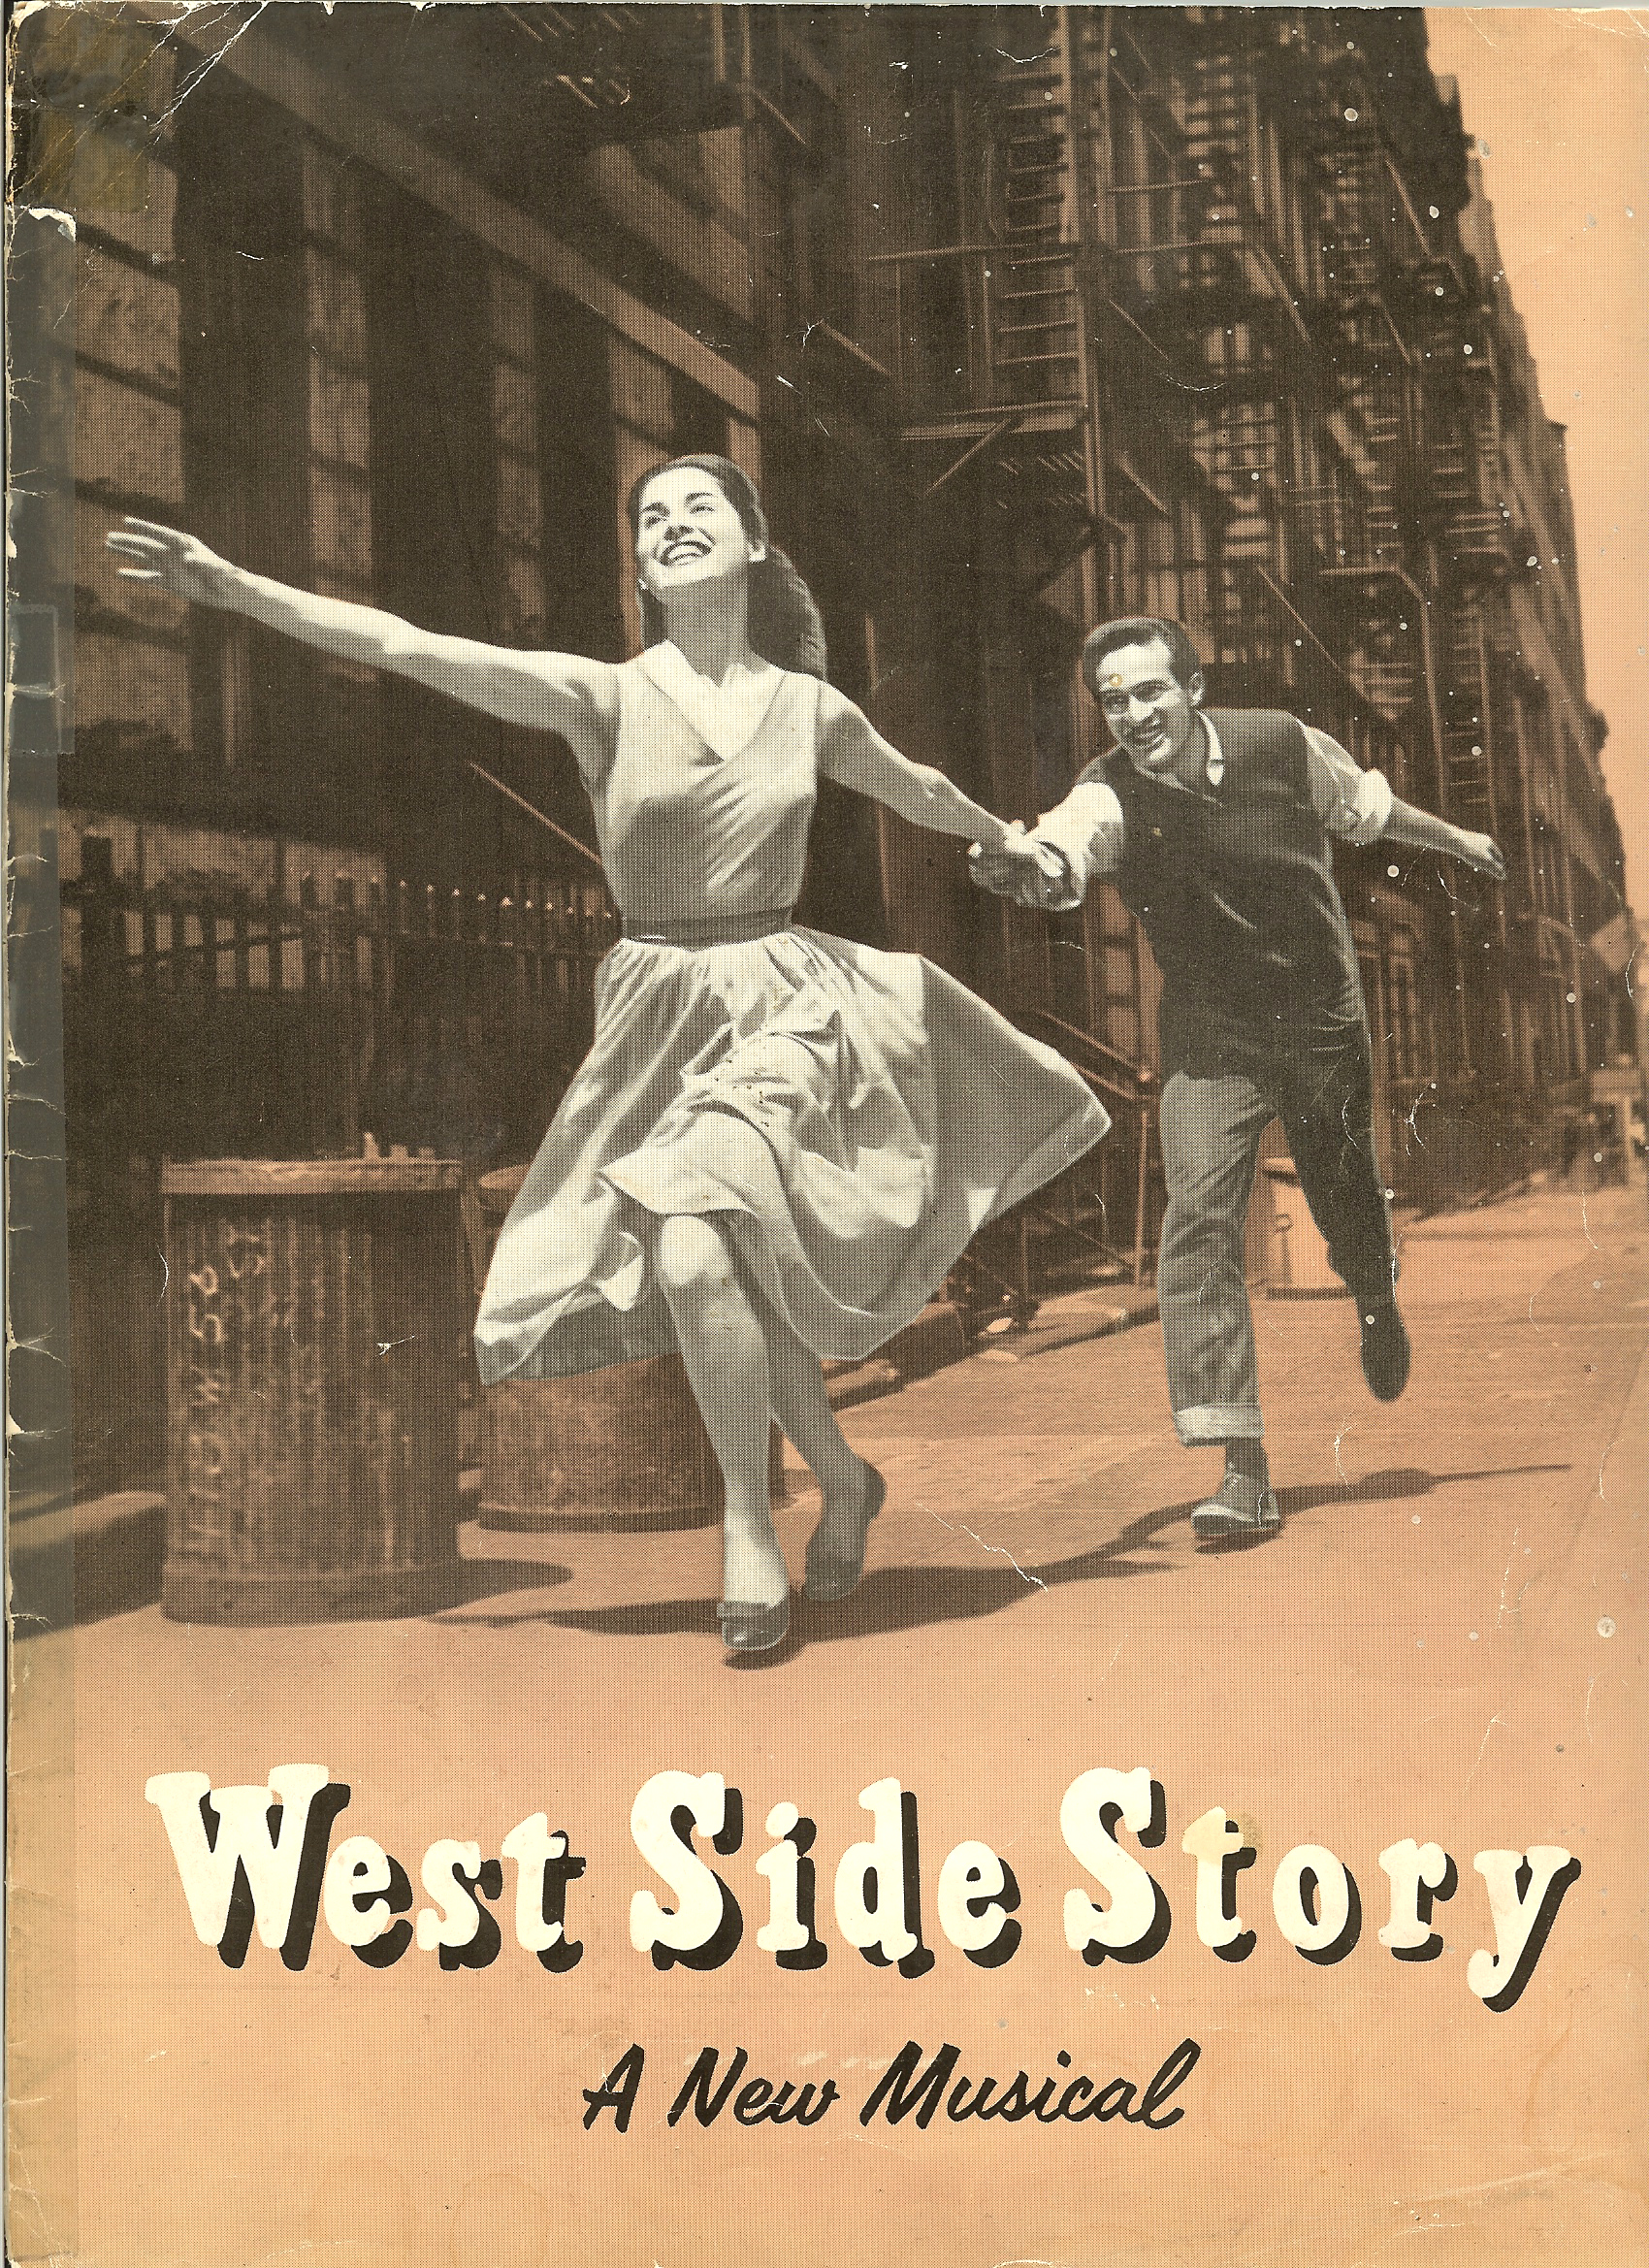 West Side Story Playbill, Opening Night was Sep 26, 1957